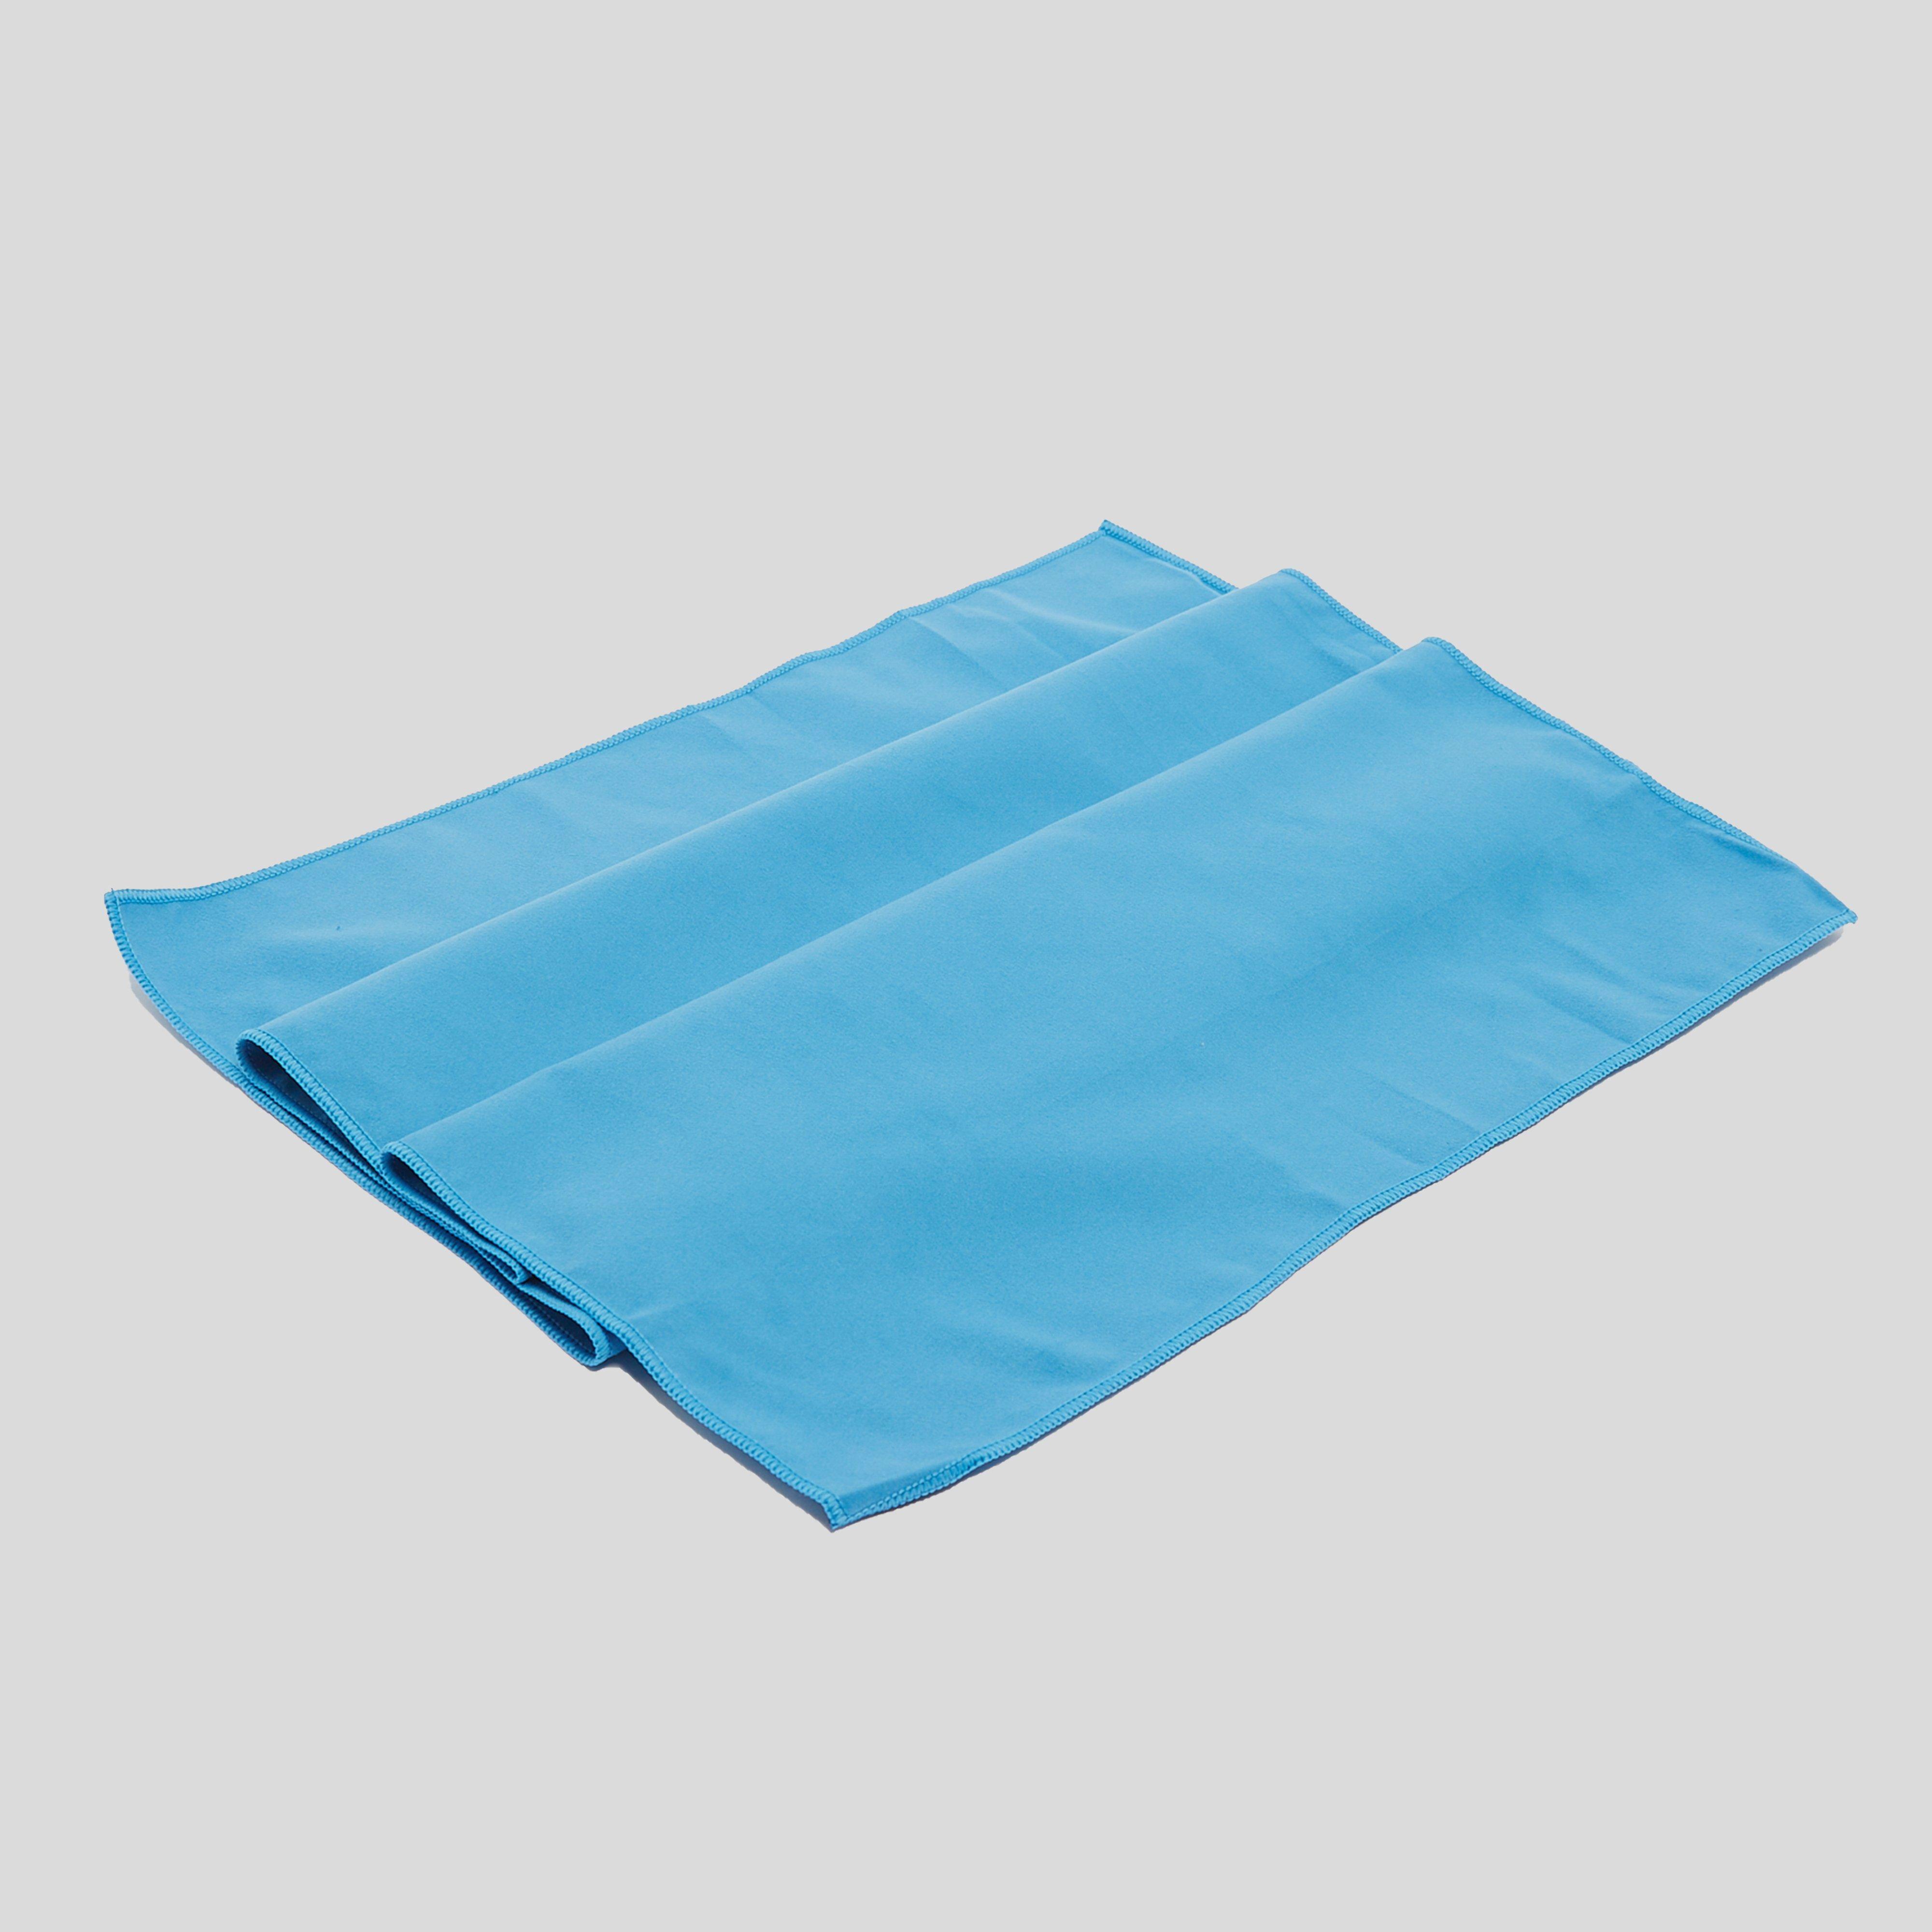 Image of Technicals Suede Microfibre Towel Travel (Small) - Blue/Mbl, Blue/MBL